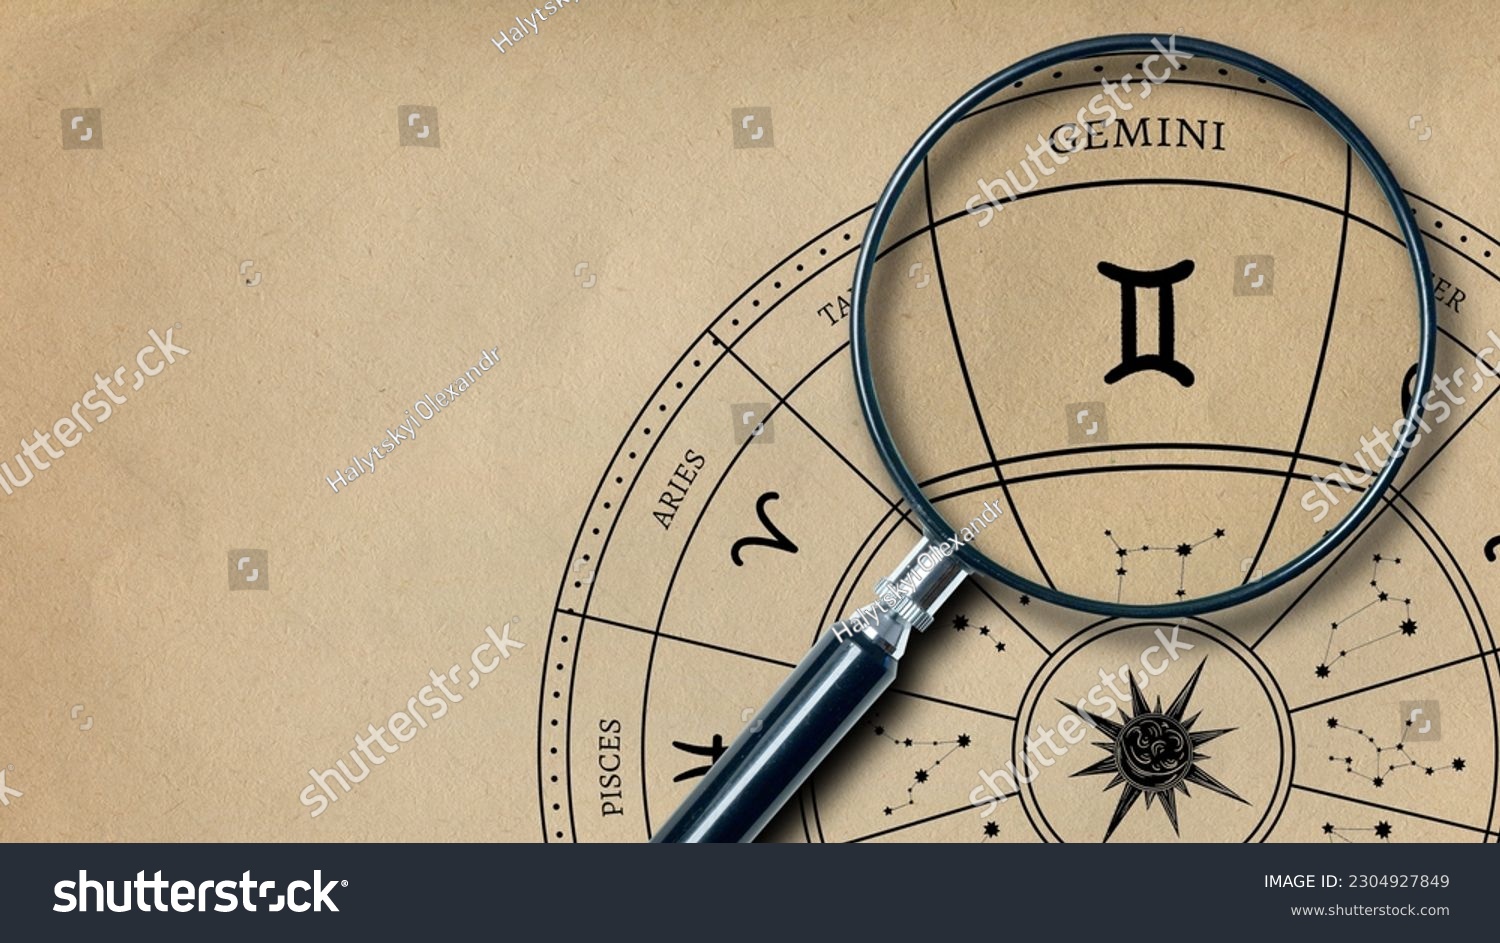 The imprint of the zodiac sign Gemini on old paper is enlarged with a lens #2304927849